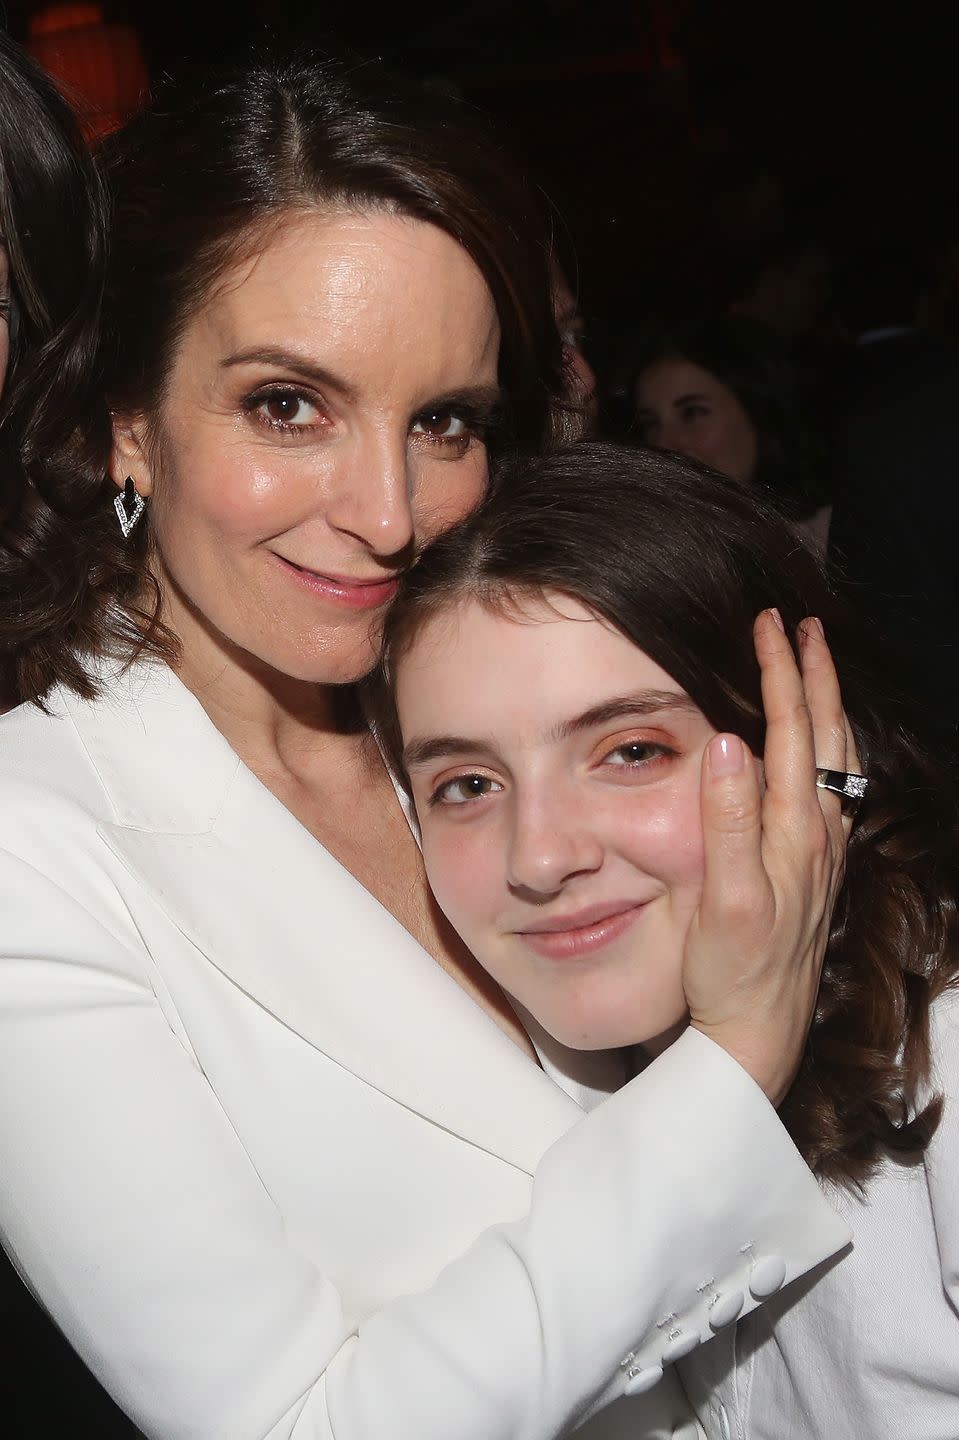 <p>In the same vein as Jada and Willow, Tina Fey enlisted the help of her daughter Alice to play a young Liz Lemon on <em>30 Rock</em>. Let’s just say, <a href="https://www.businessinsider.com/tina-feys-real-life-daughter-played-young-liz-lemon-on-last-nights-30-rock-2012-11" rel="nofollow noopener" target="_blank" data-ylk="slk:she totally nailed it" class="link ">she totally nailed it</a>.</p>